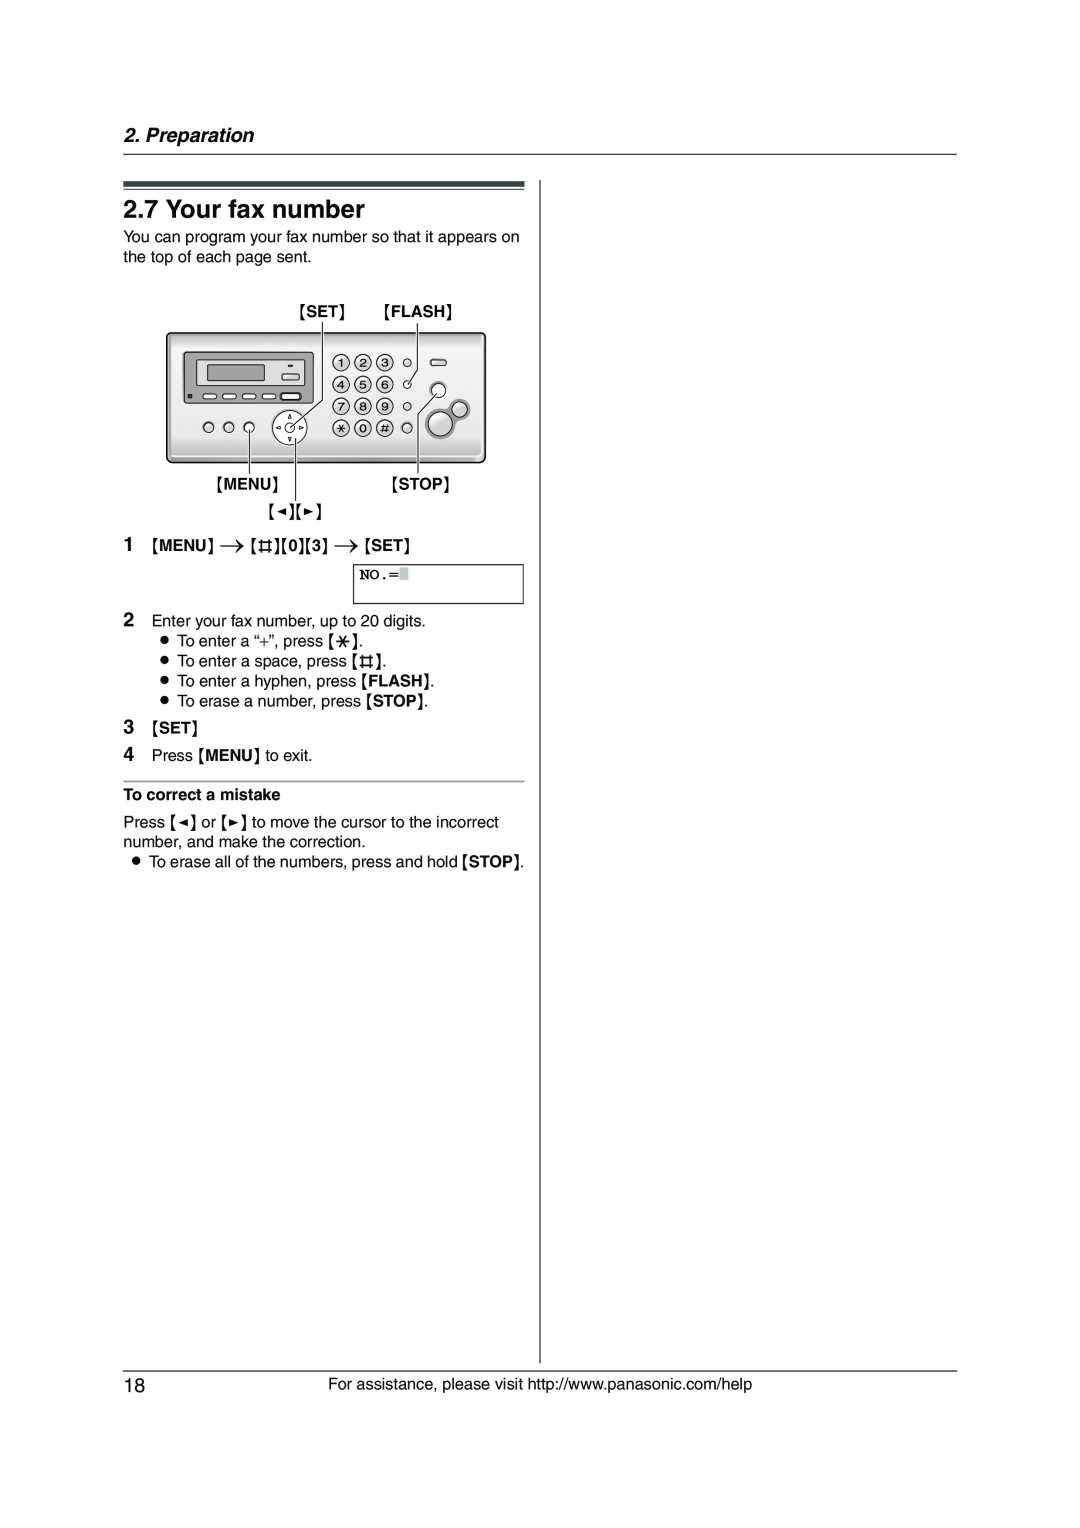 Panasonic KX-FP215 operating instructions Your fax number, Preparation, No.= 